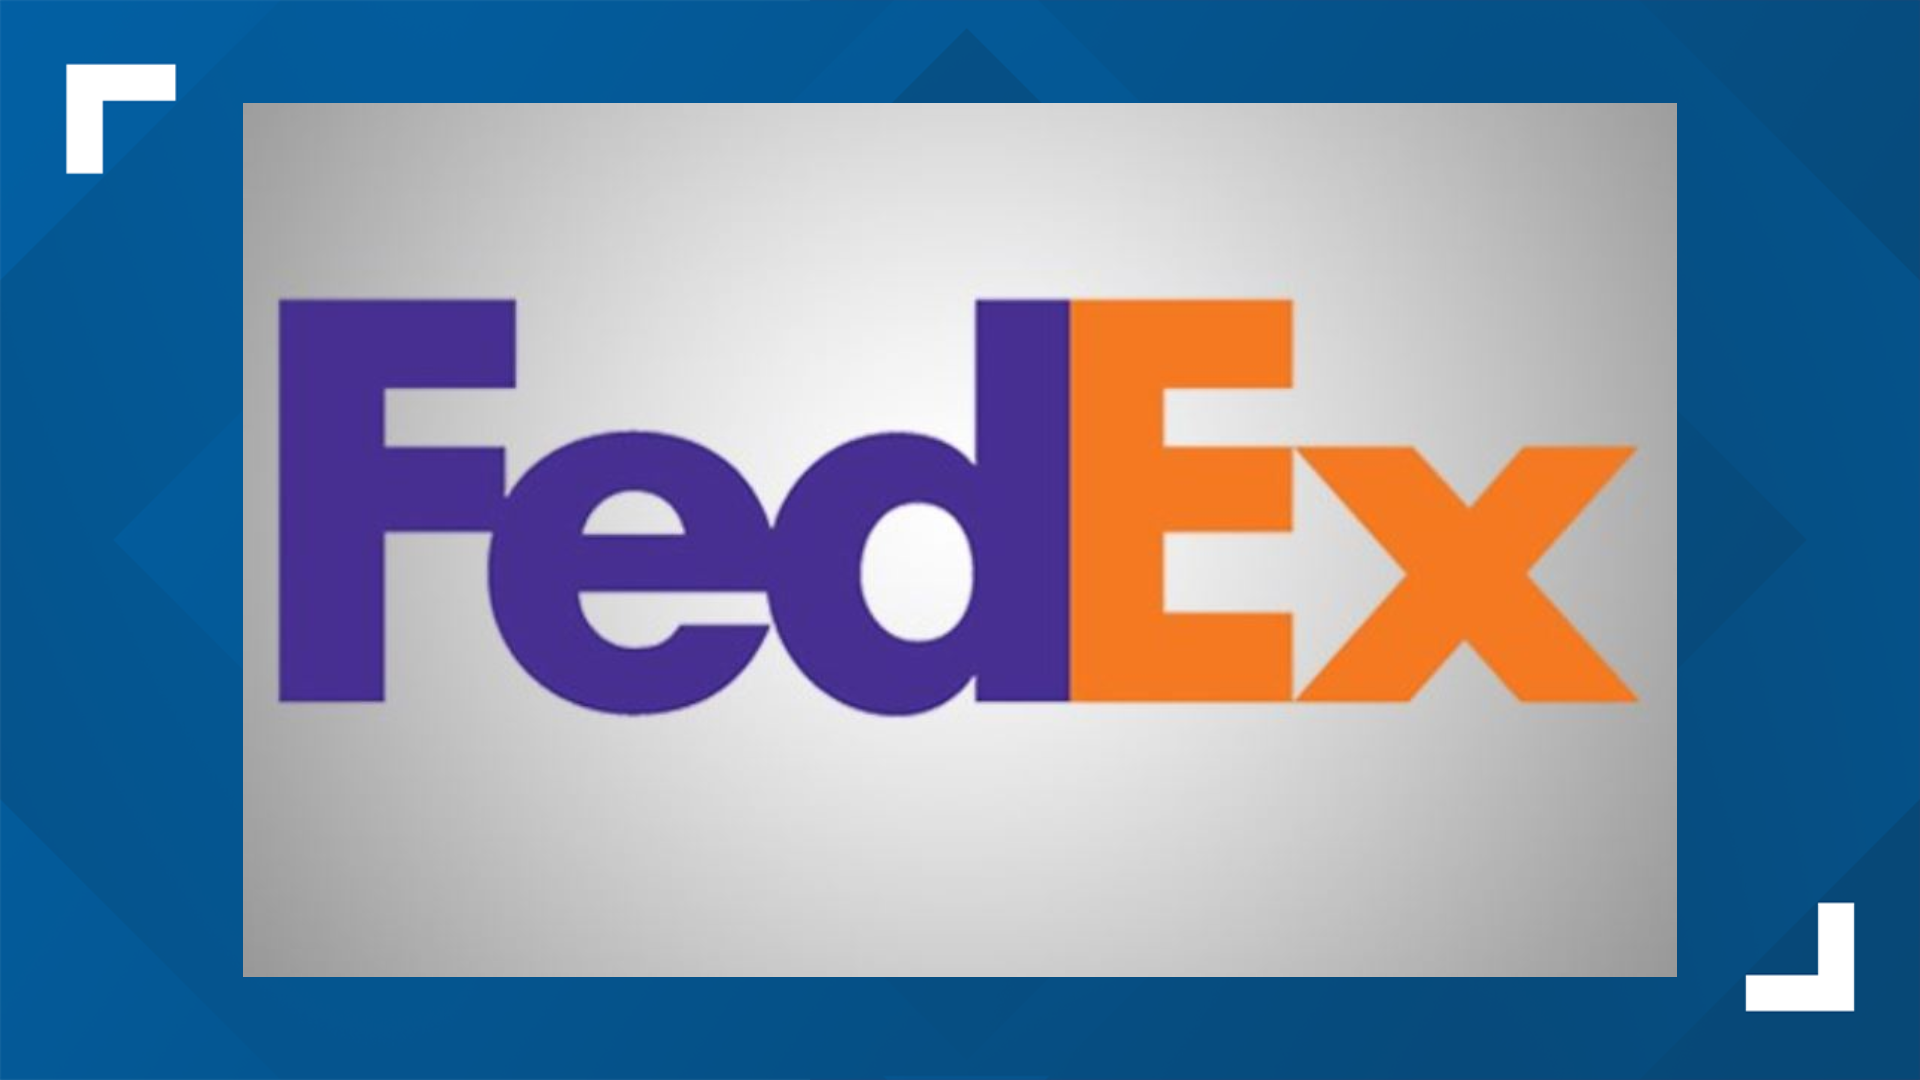 Fedex Corporation starts grant program to help small businesses